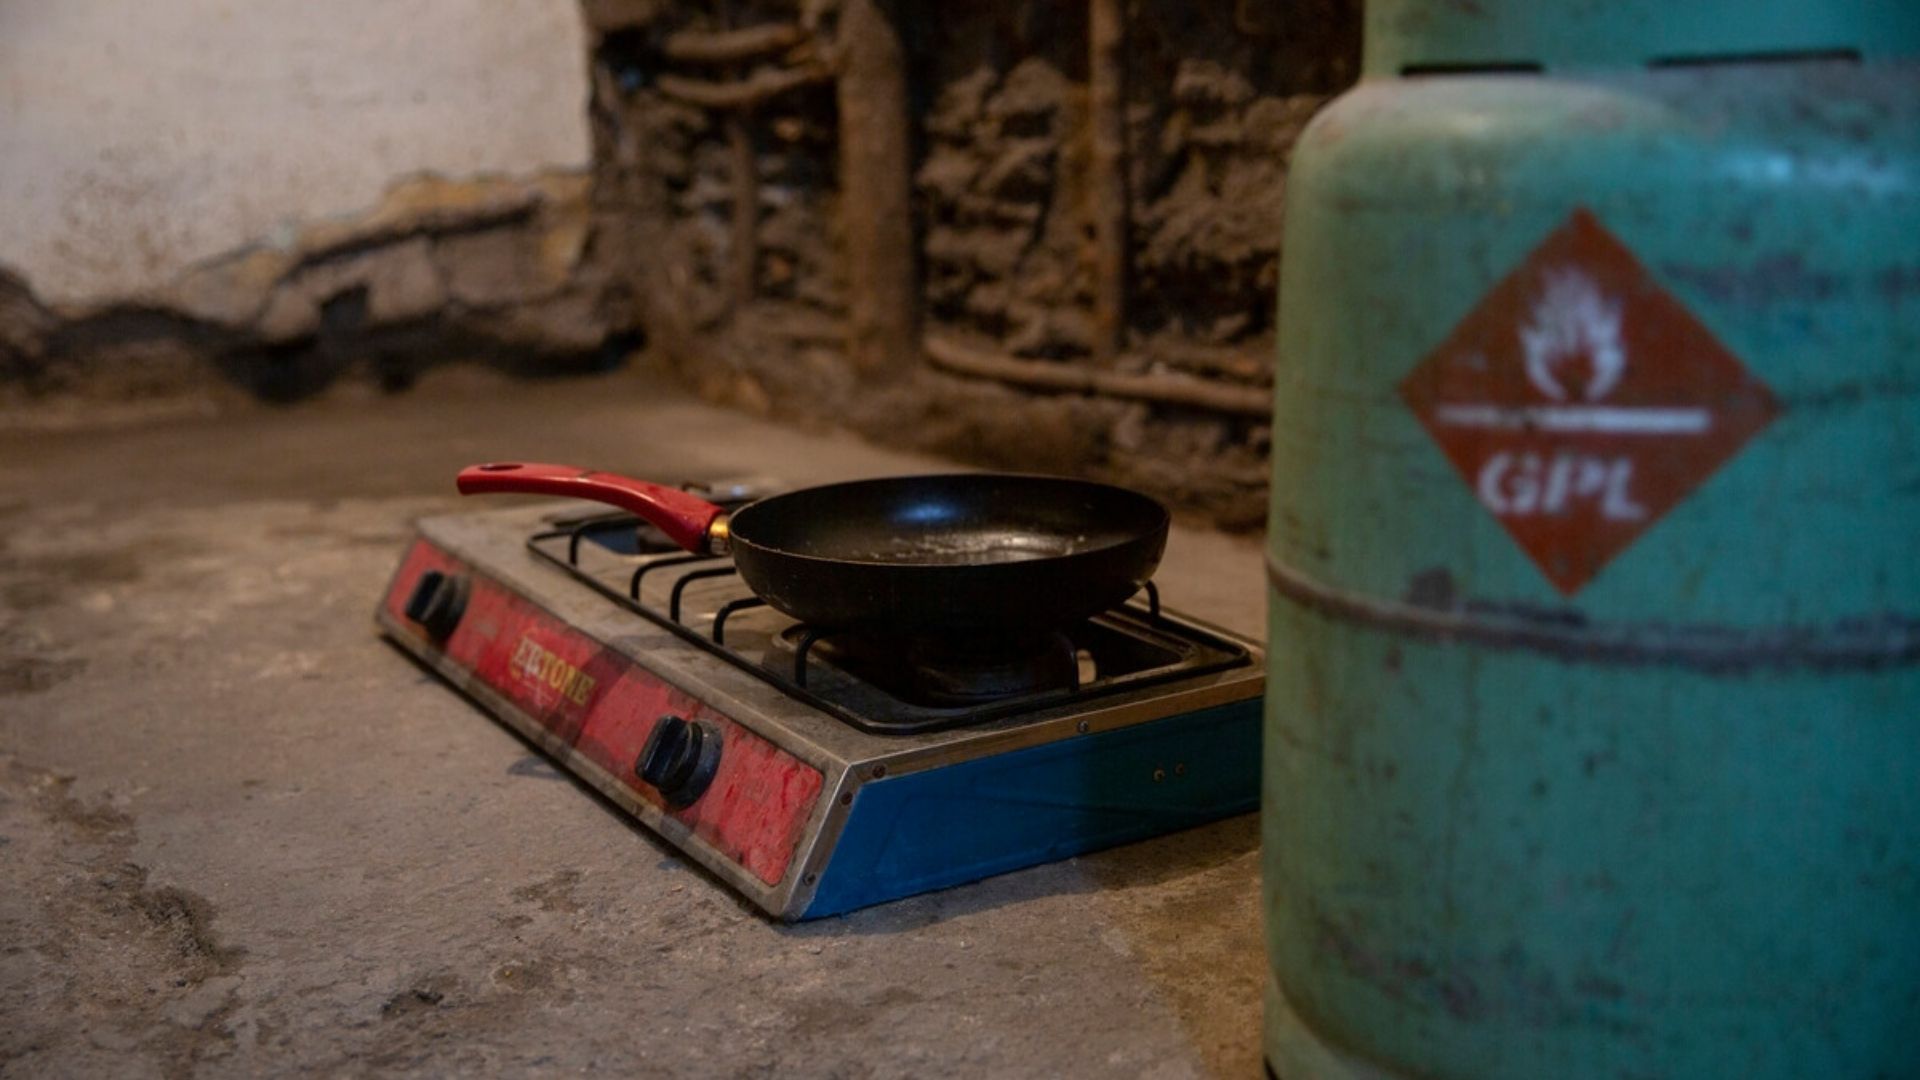 A gas canister in the foreground used to fuel the cooker on the floor. This is in the home of one of the families we work with in Romania